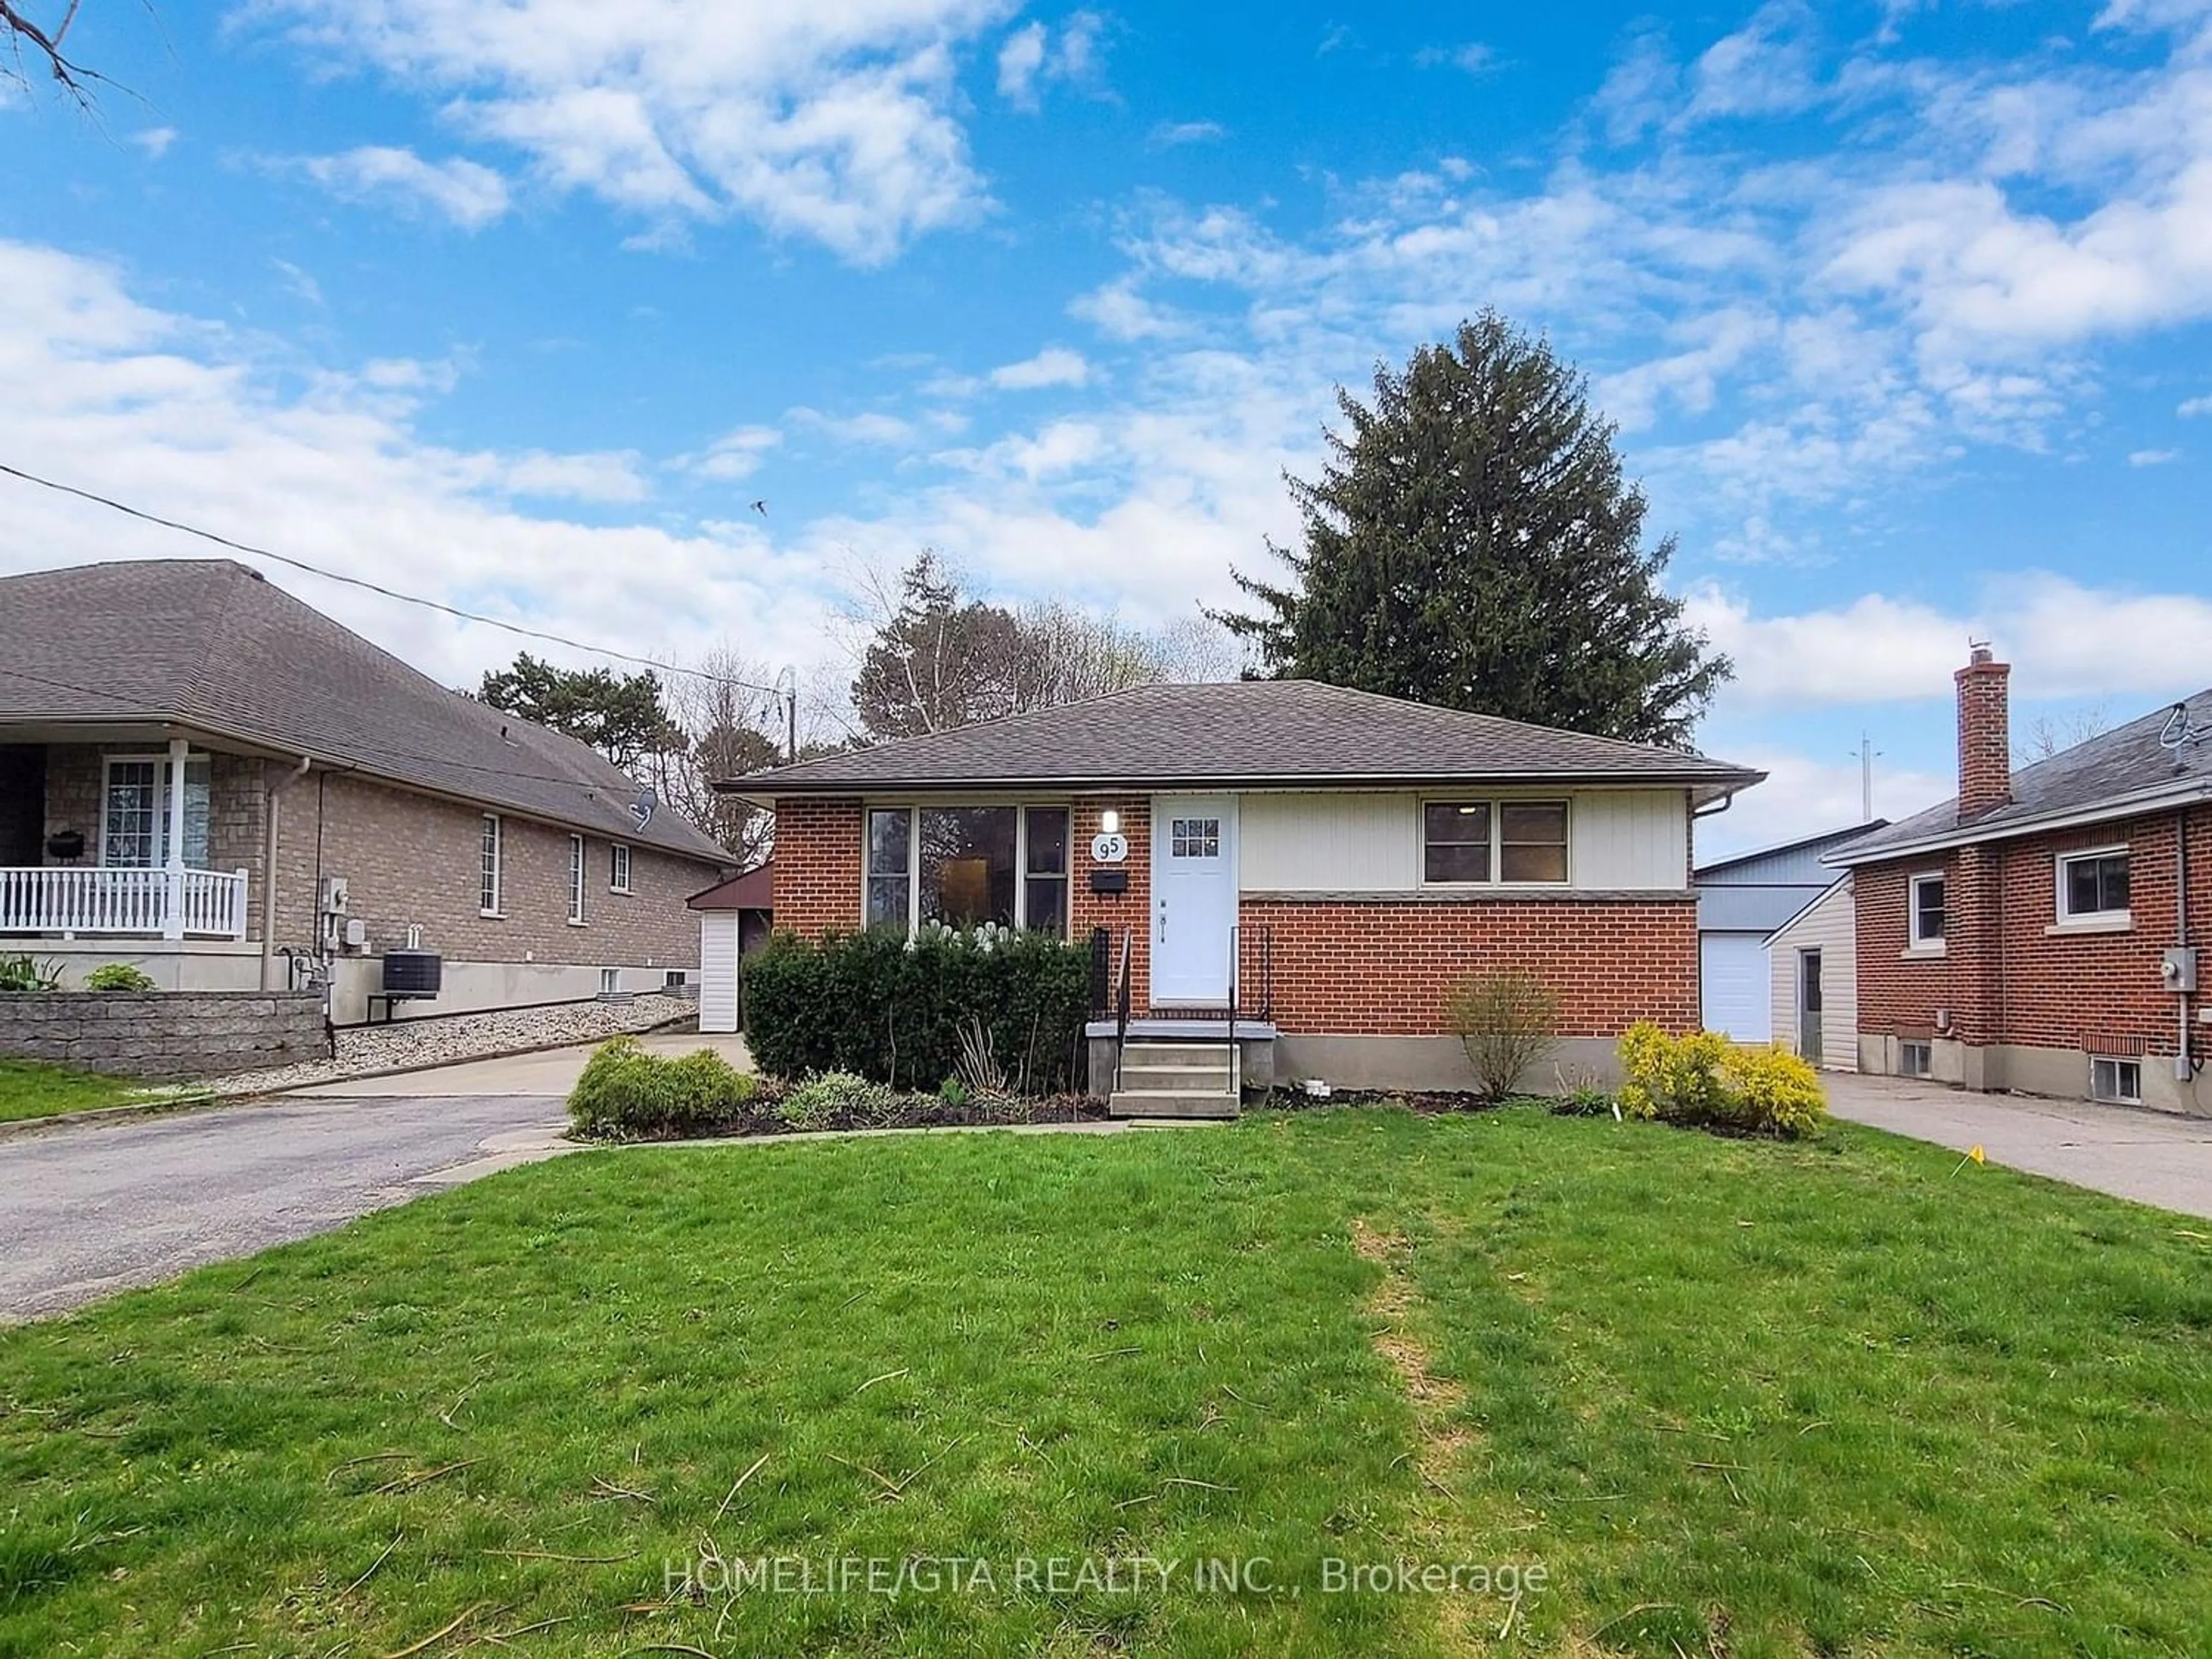 Frontside or backside of a home for 95 Clarke St, Woodstock Ontario N4S 7M4